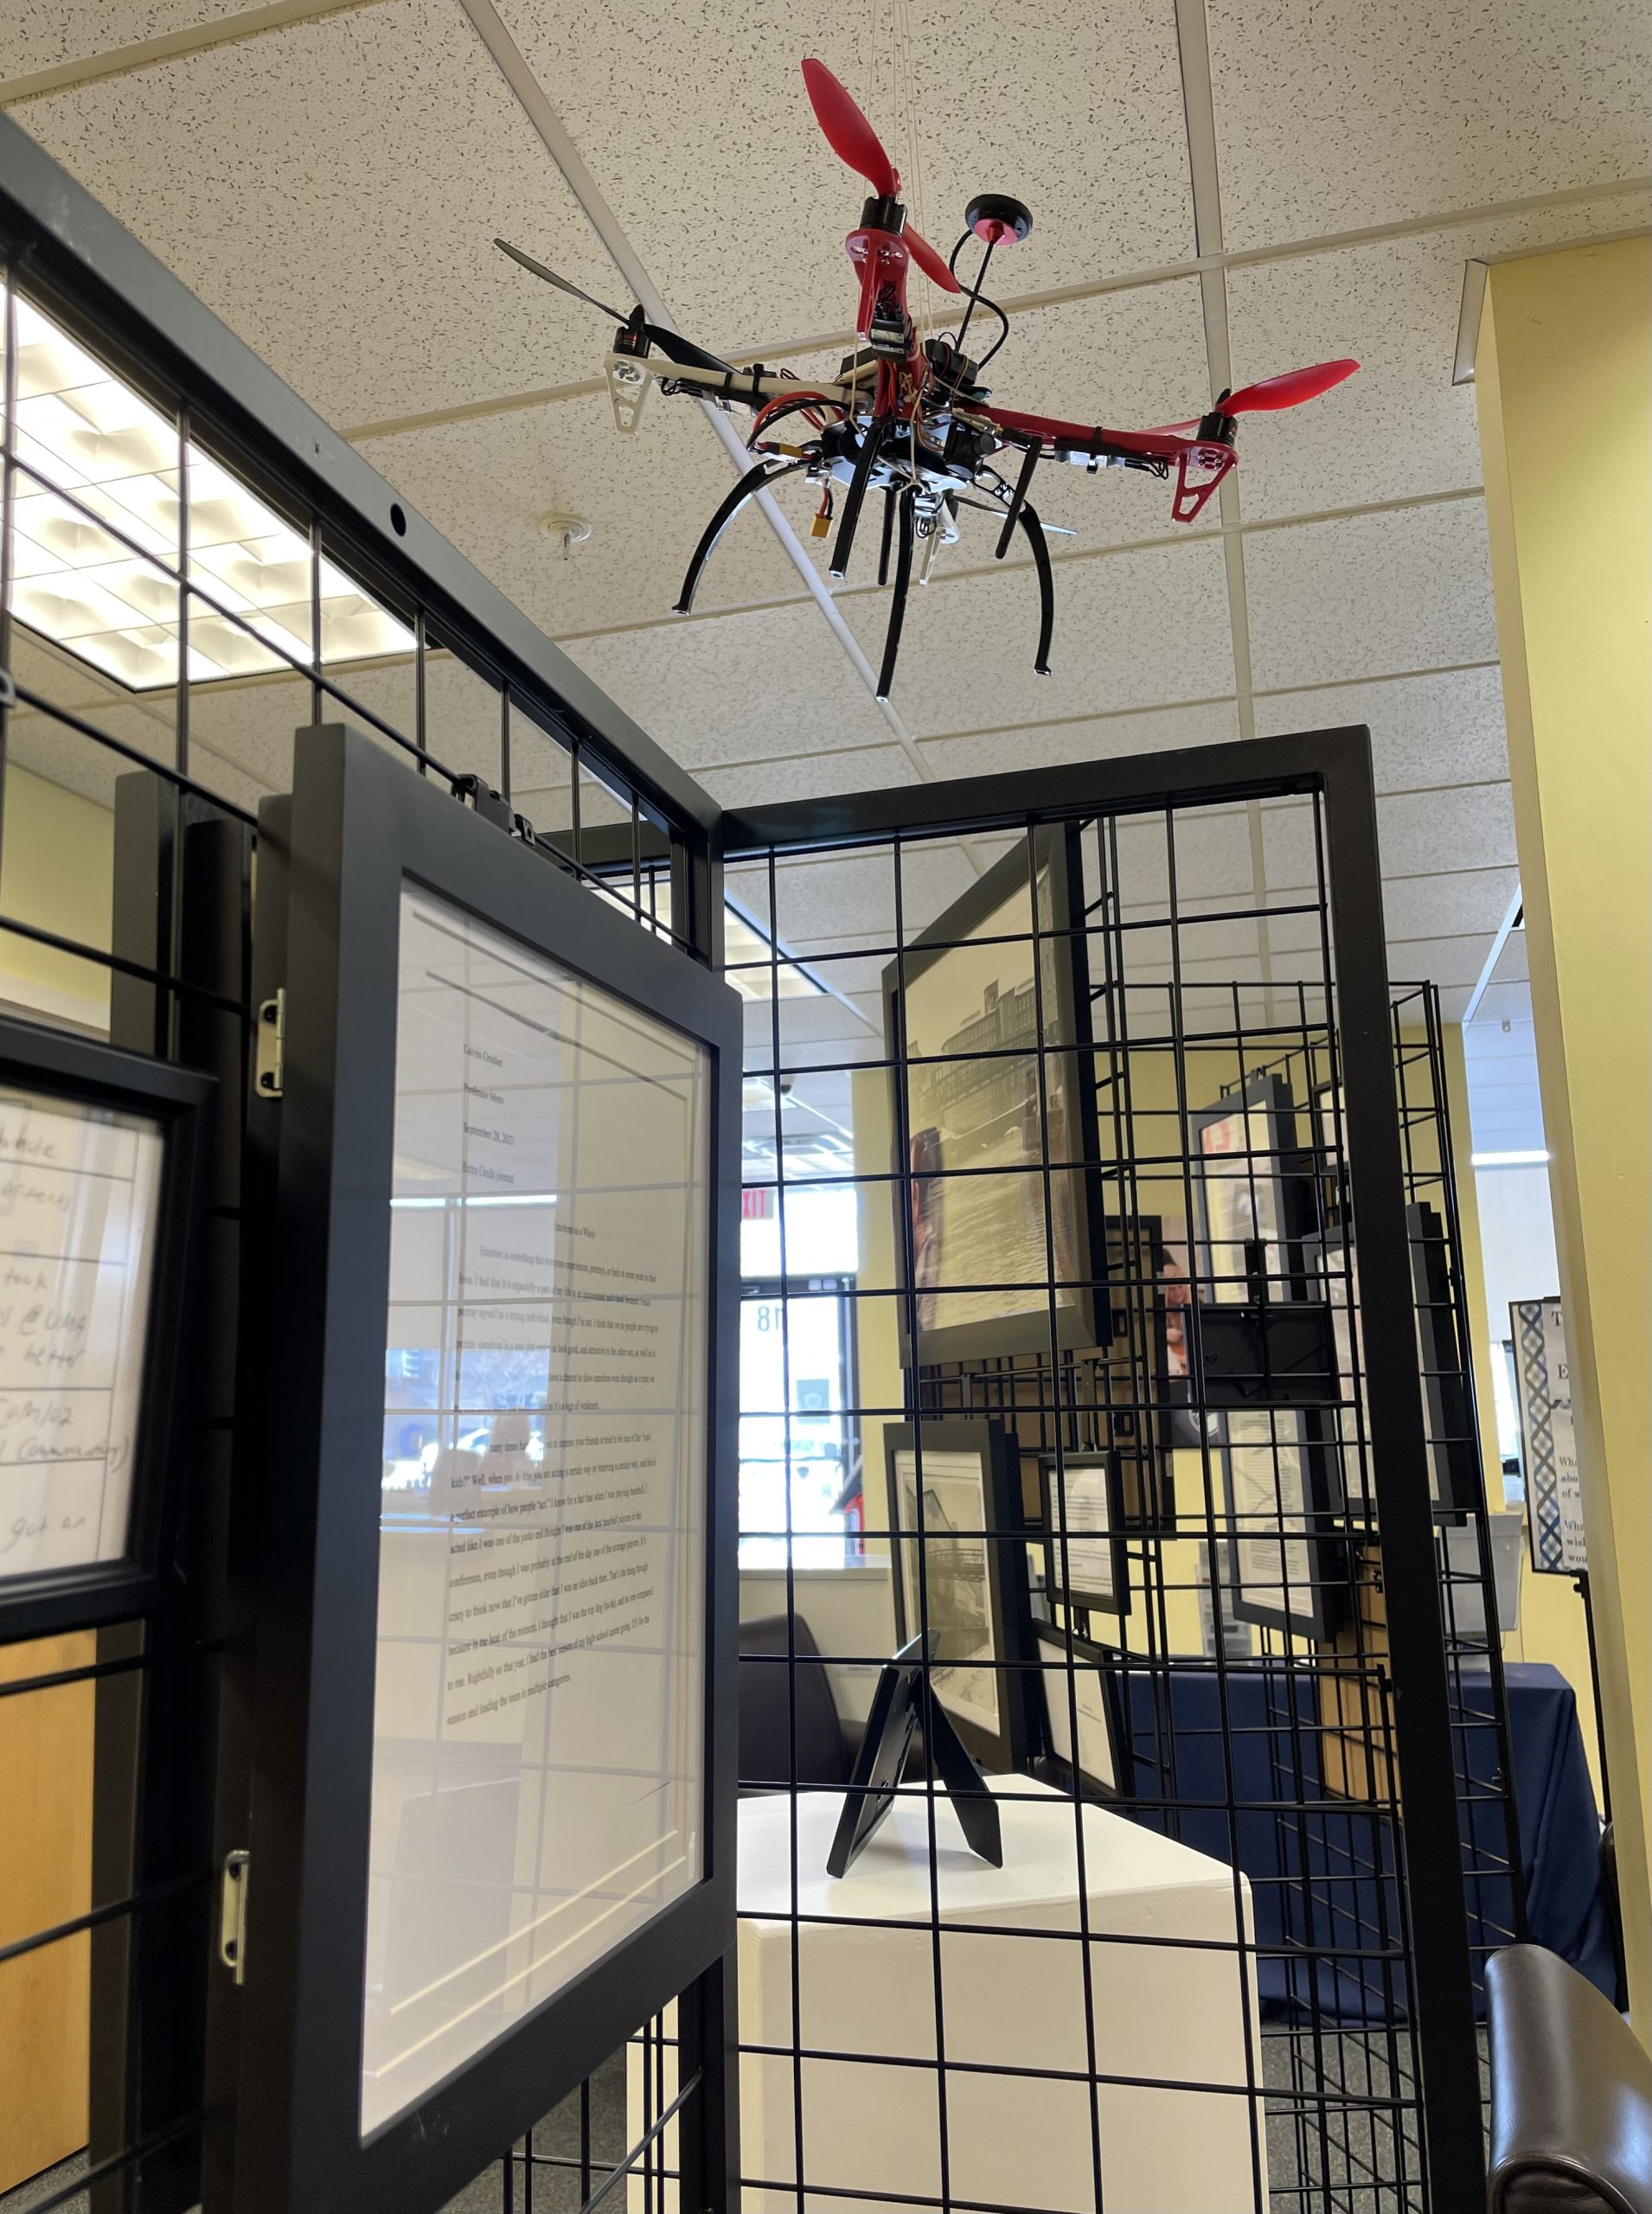 A drone created by a UMA Student hangs over a display of other student work.